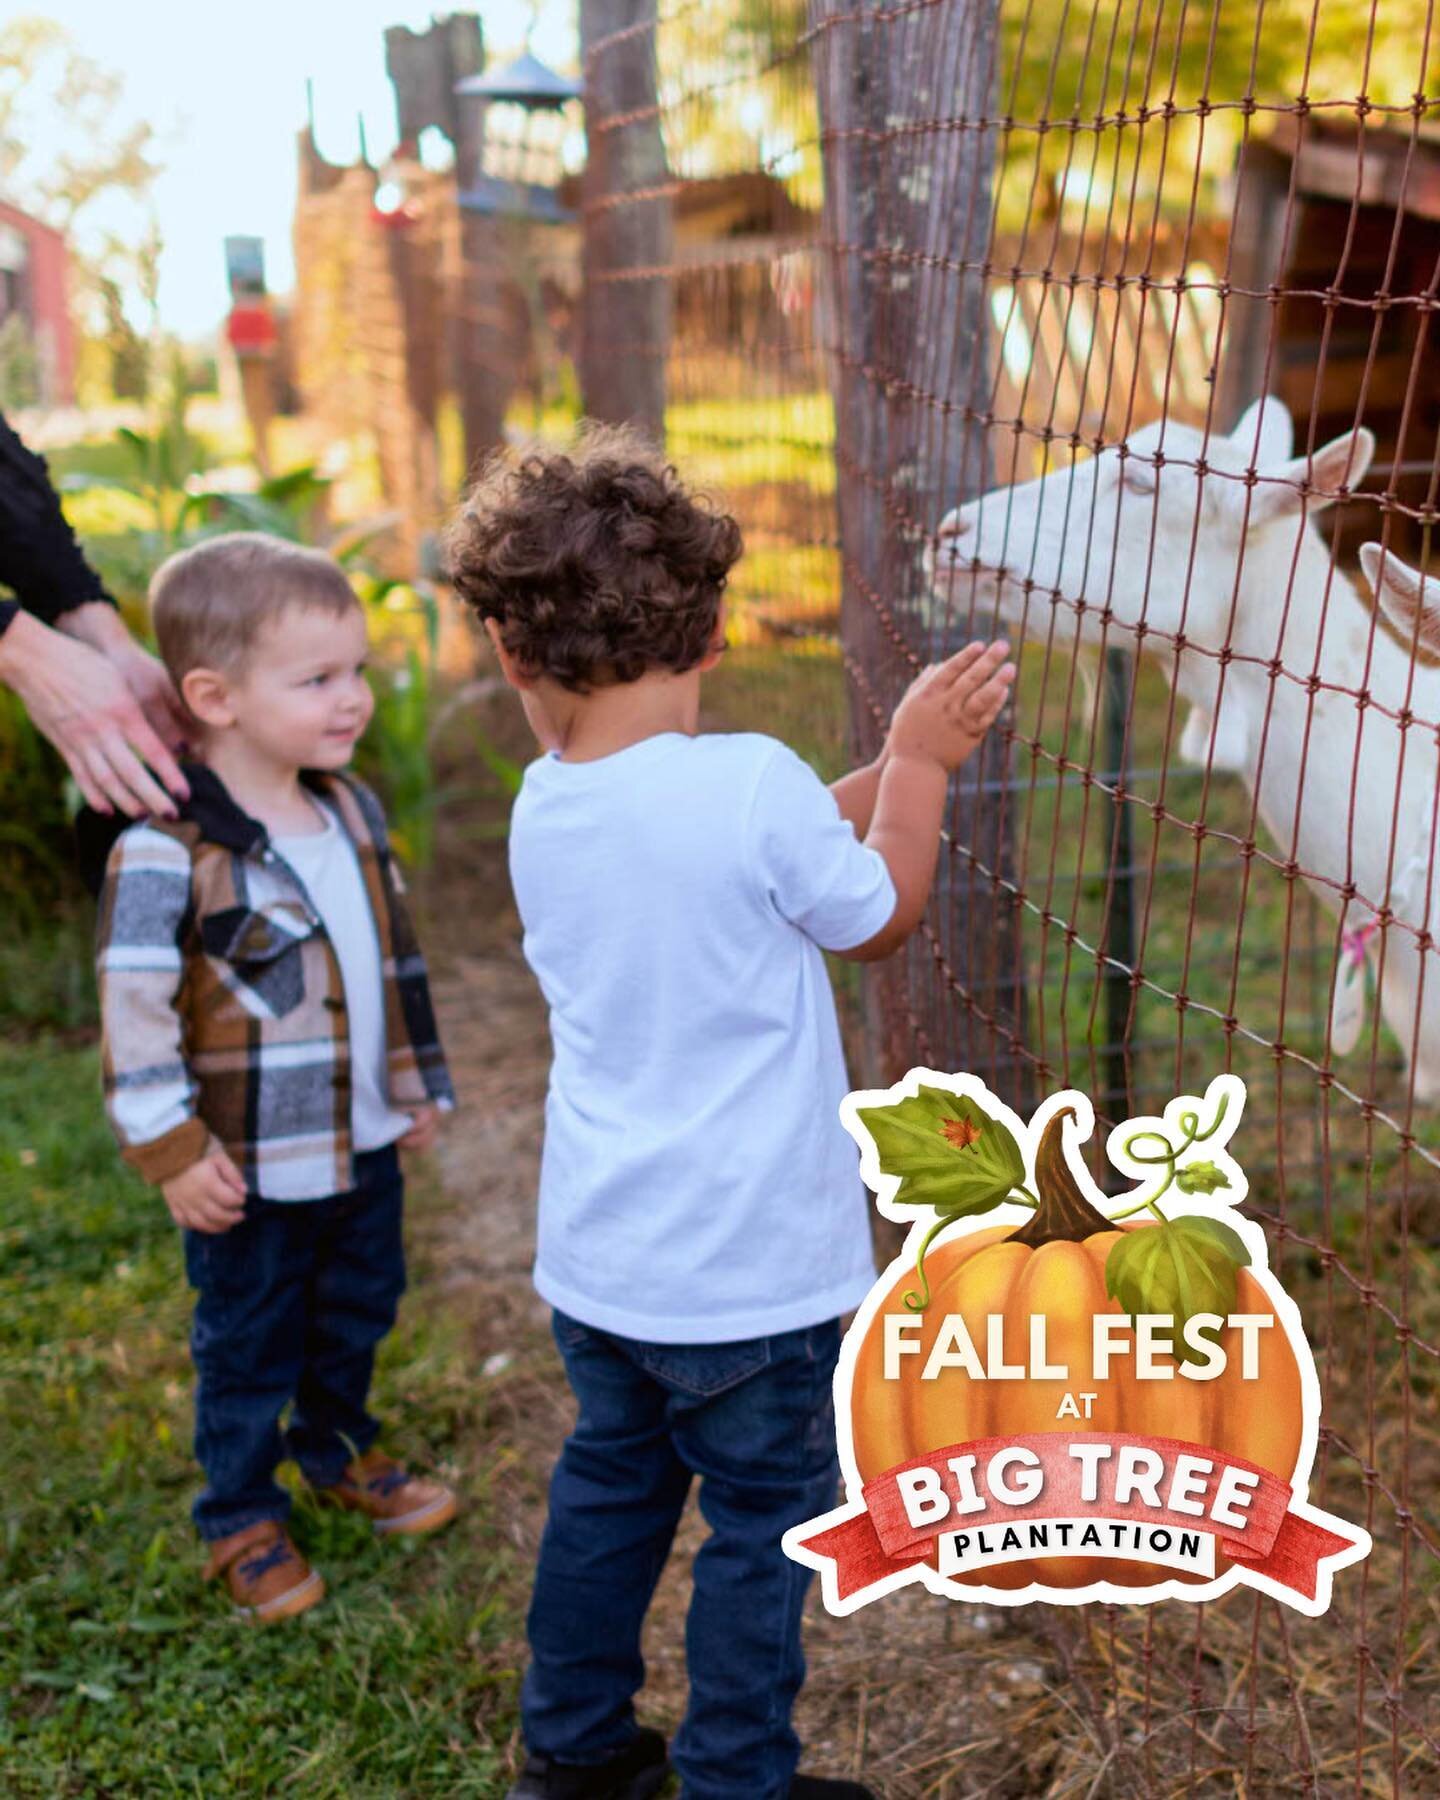 🍂Fall into FUN one more weekend at Big Tree's Fall Fest!🍁Look no further for all-inclusive barnyard fun this weekend! 🚜Get your tickets before you get here!